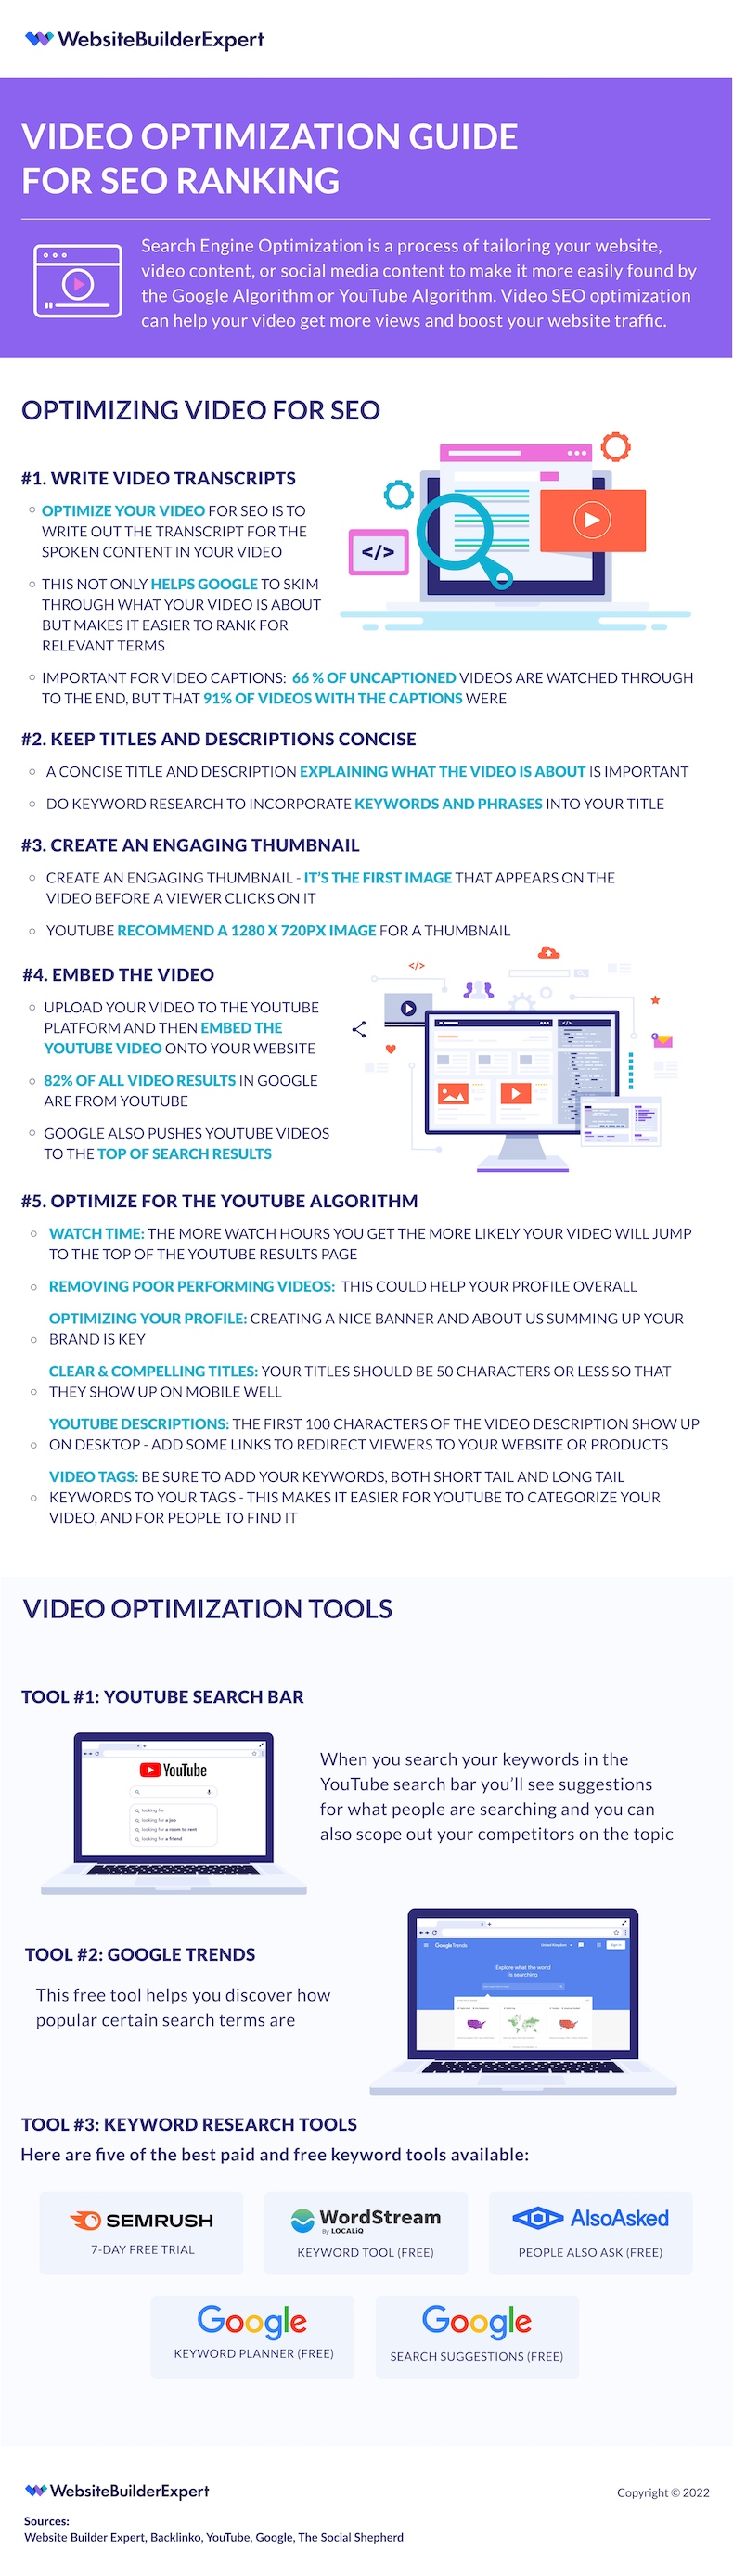 Video optimization guide for SEO ranking infographic